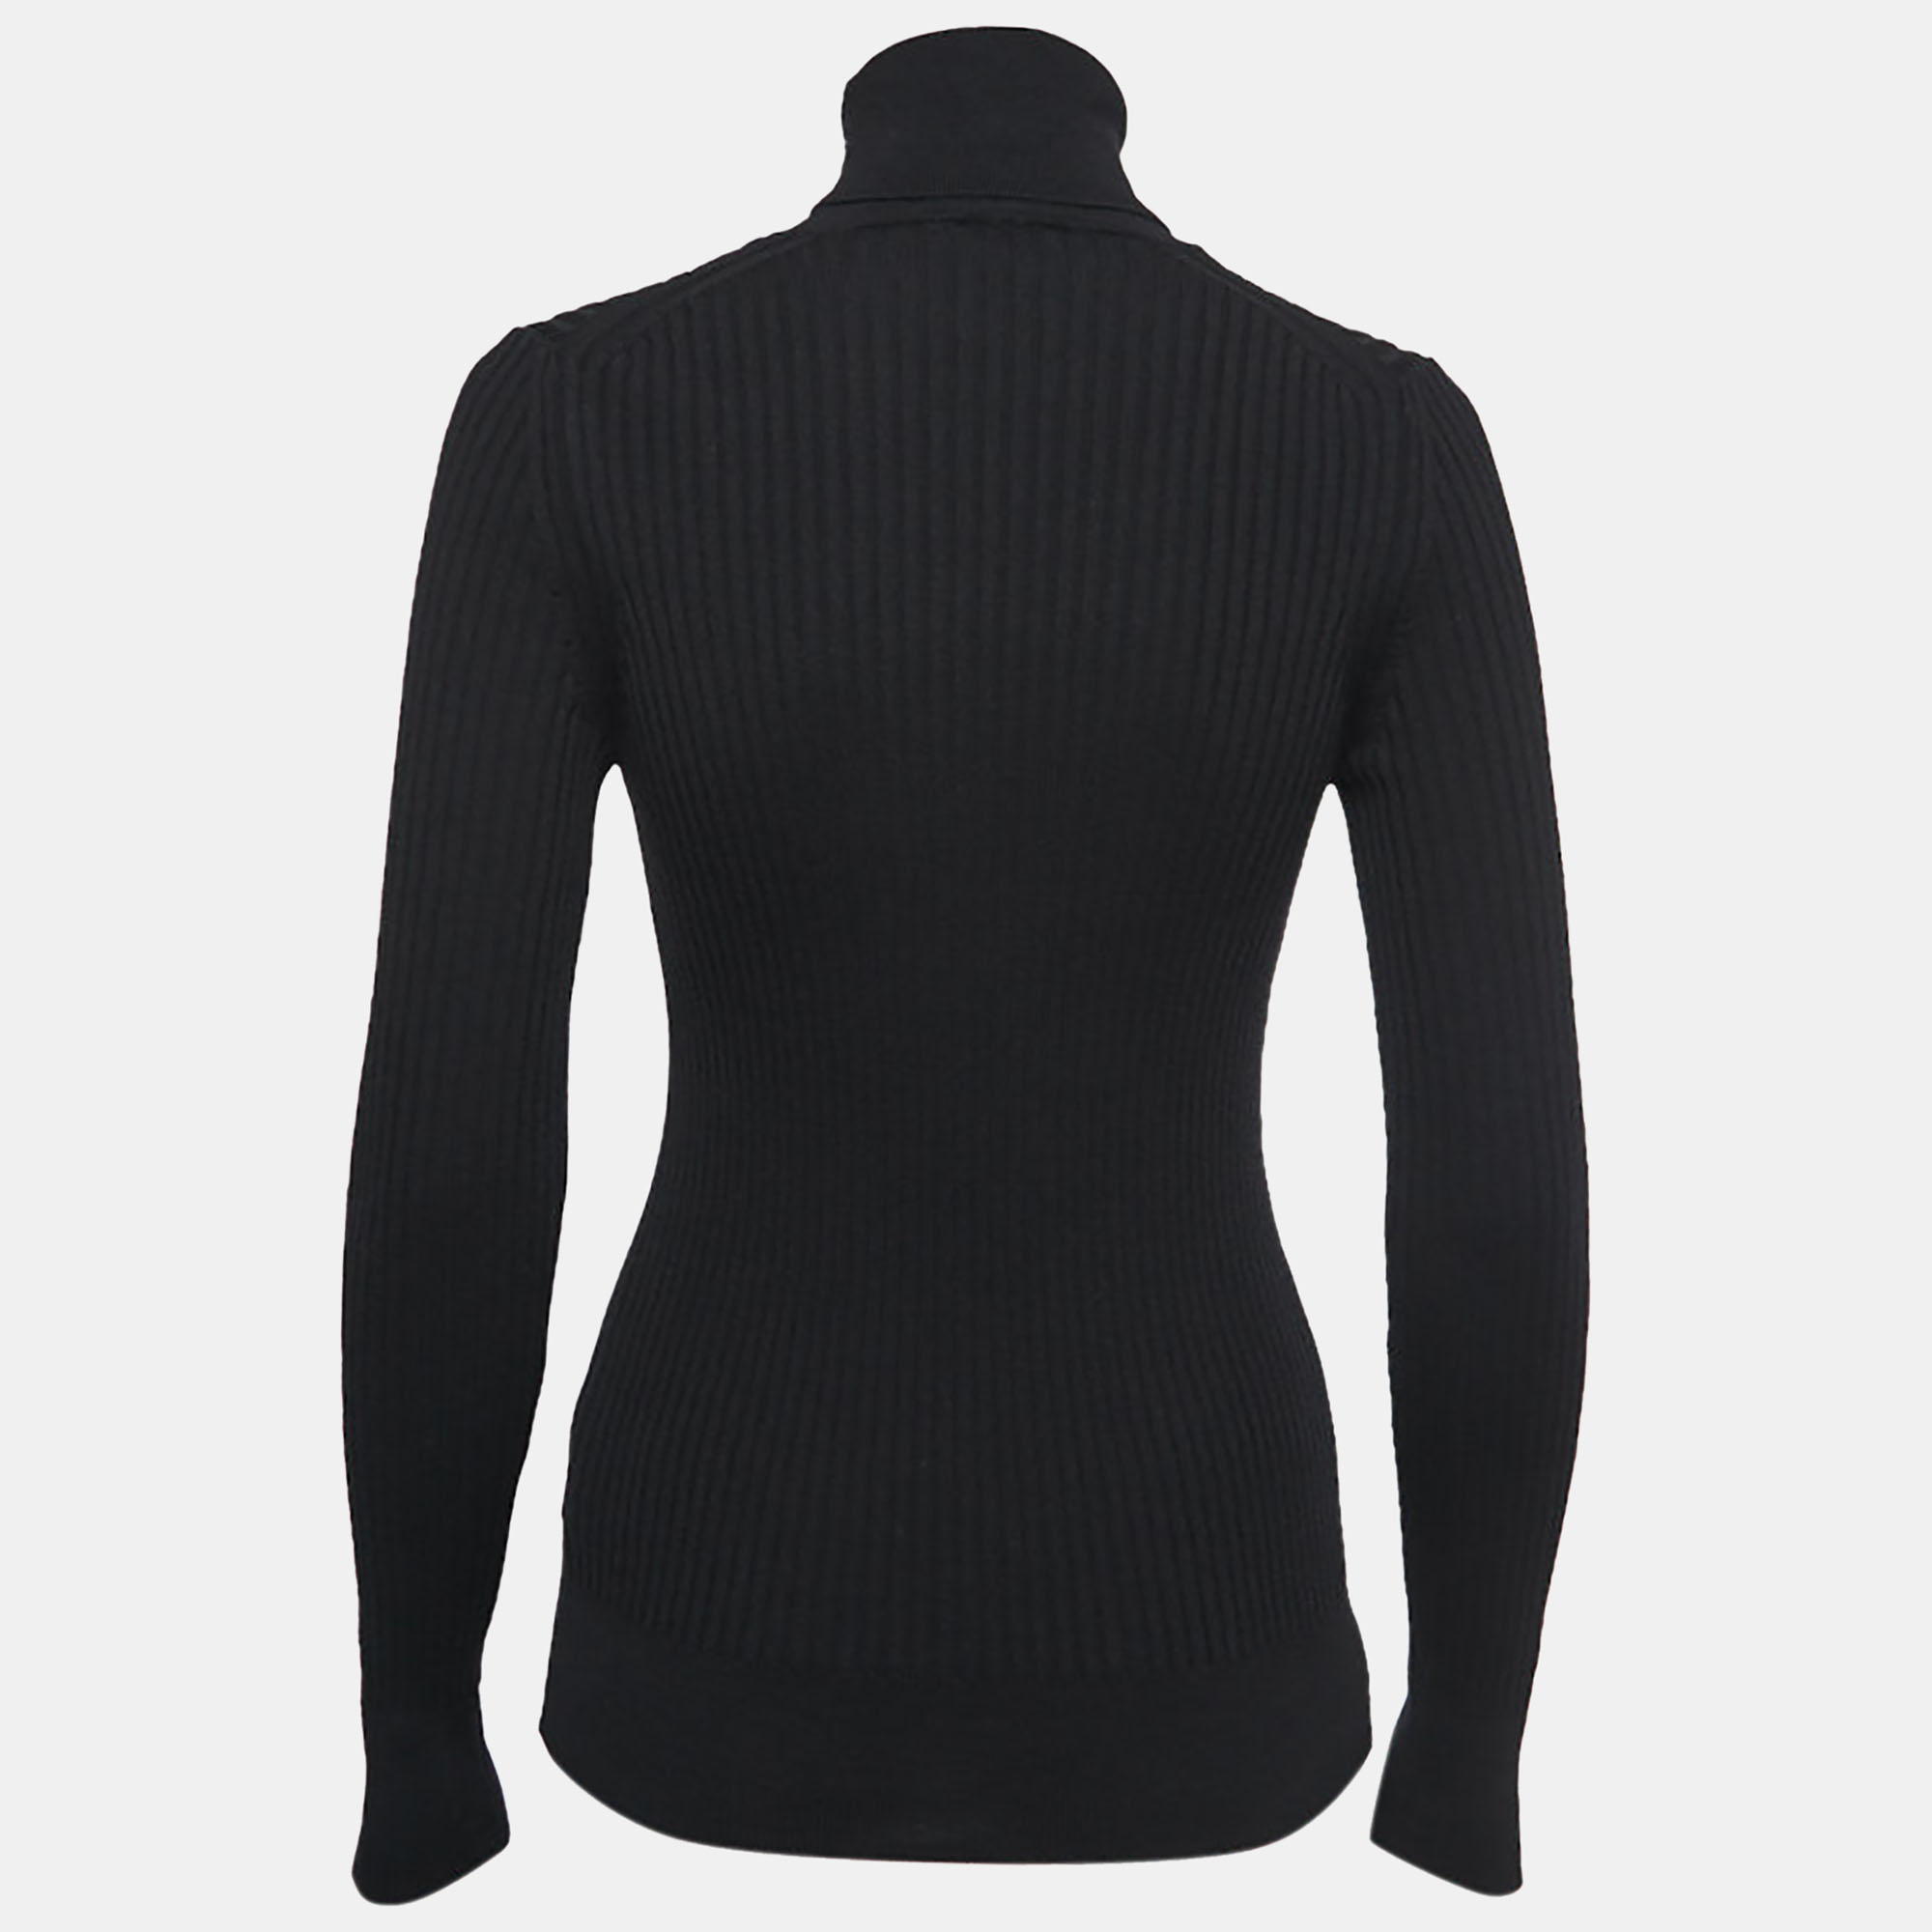 

Moncler Black Wool Rib Knit Ciclista Tricot Turtle Neck Sweater